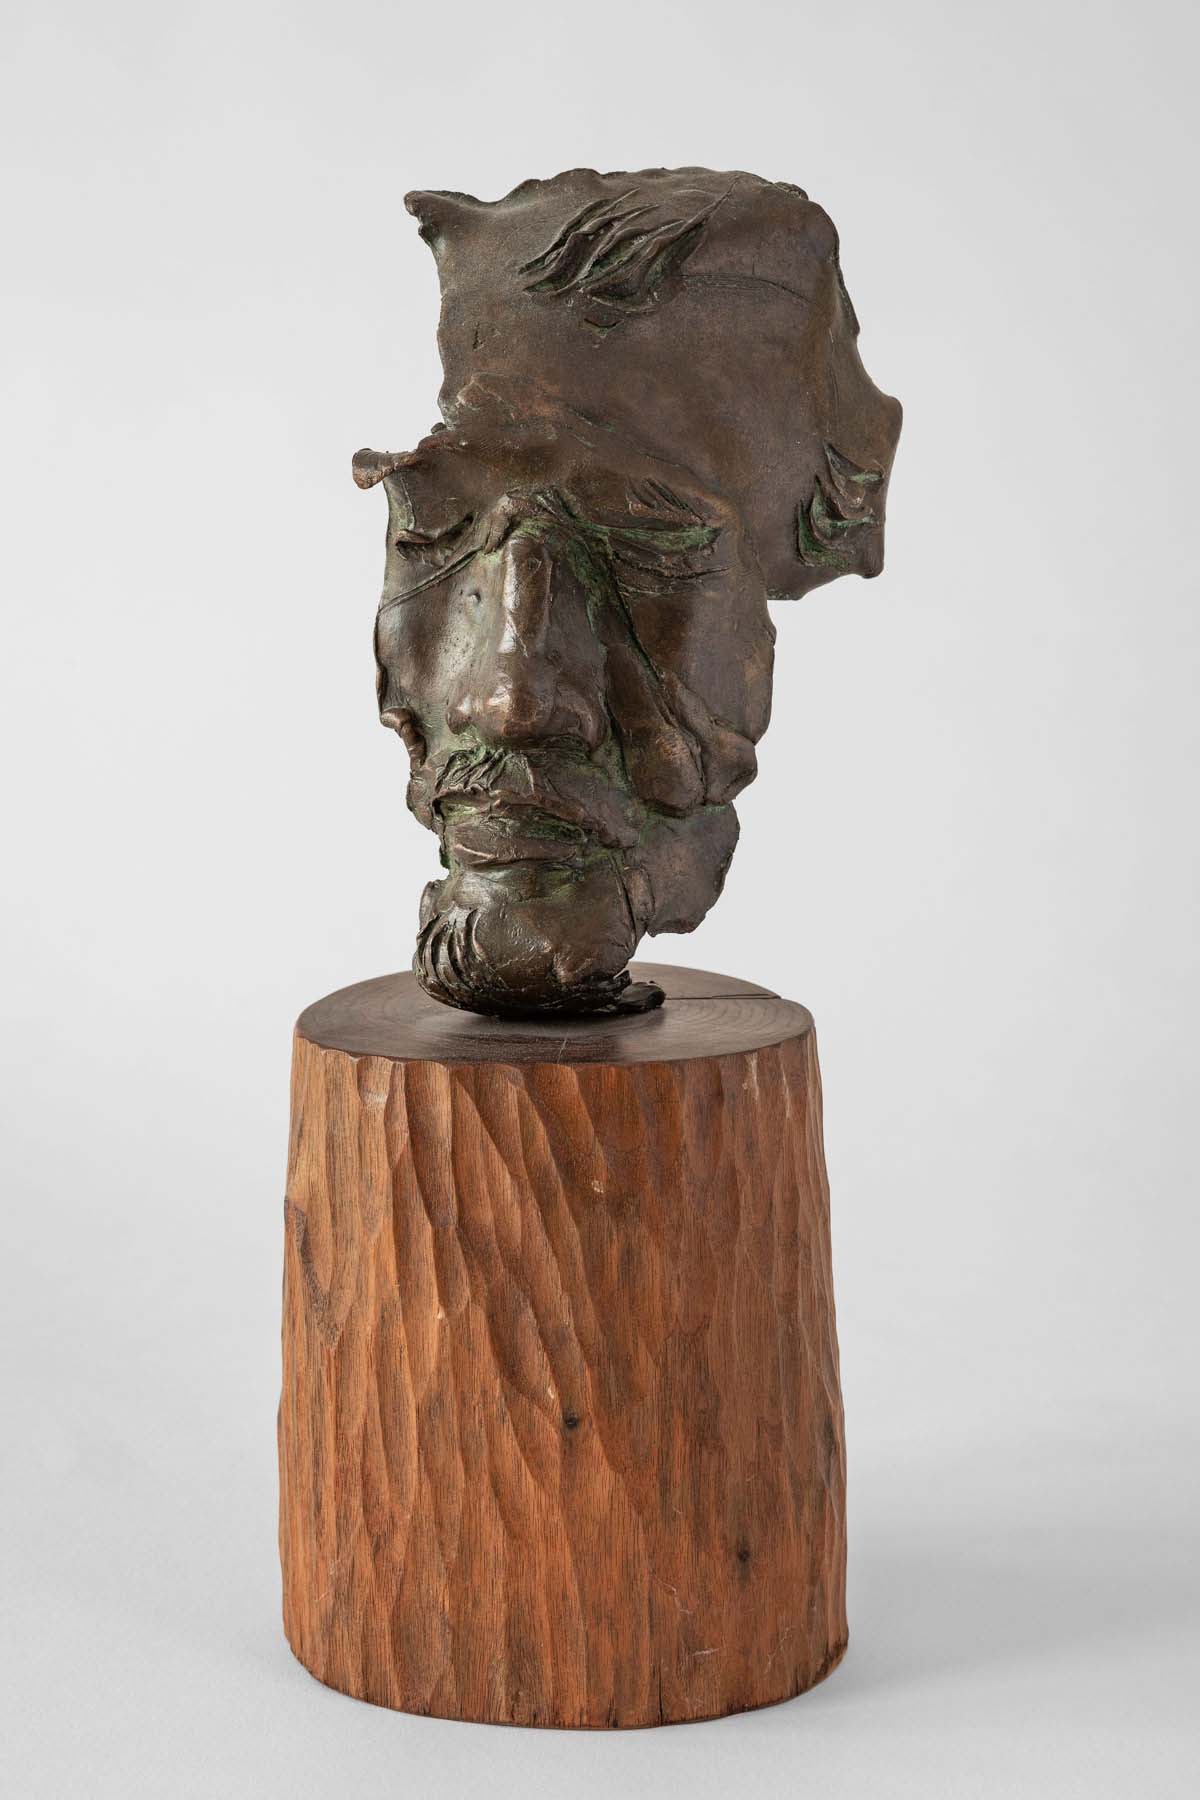 Partial bronze bust of a man with closed eyes mounted on a wood pedestal.